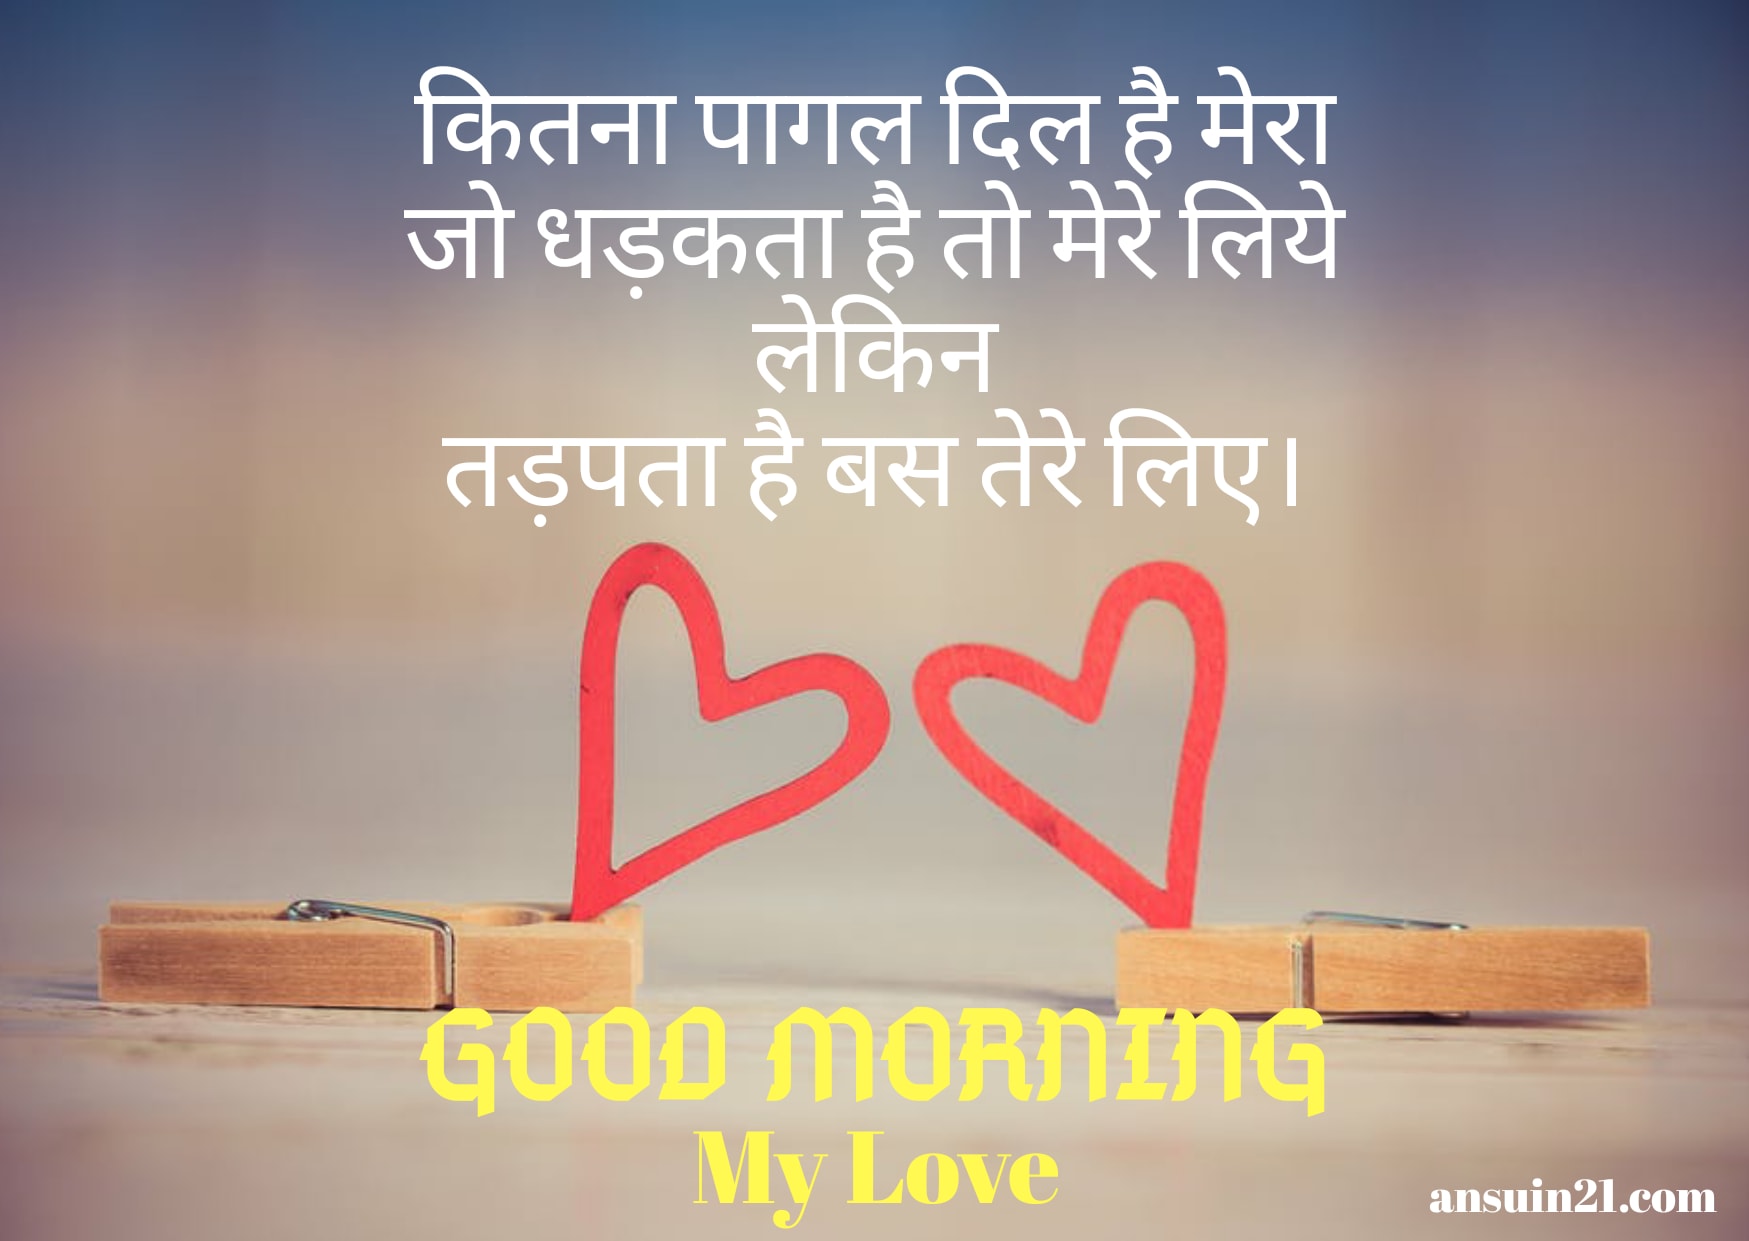 Good Morning Images for Wife Hindi, Good Morning Quotes wishes for Wife & lover